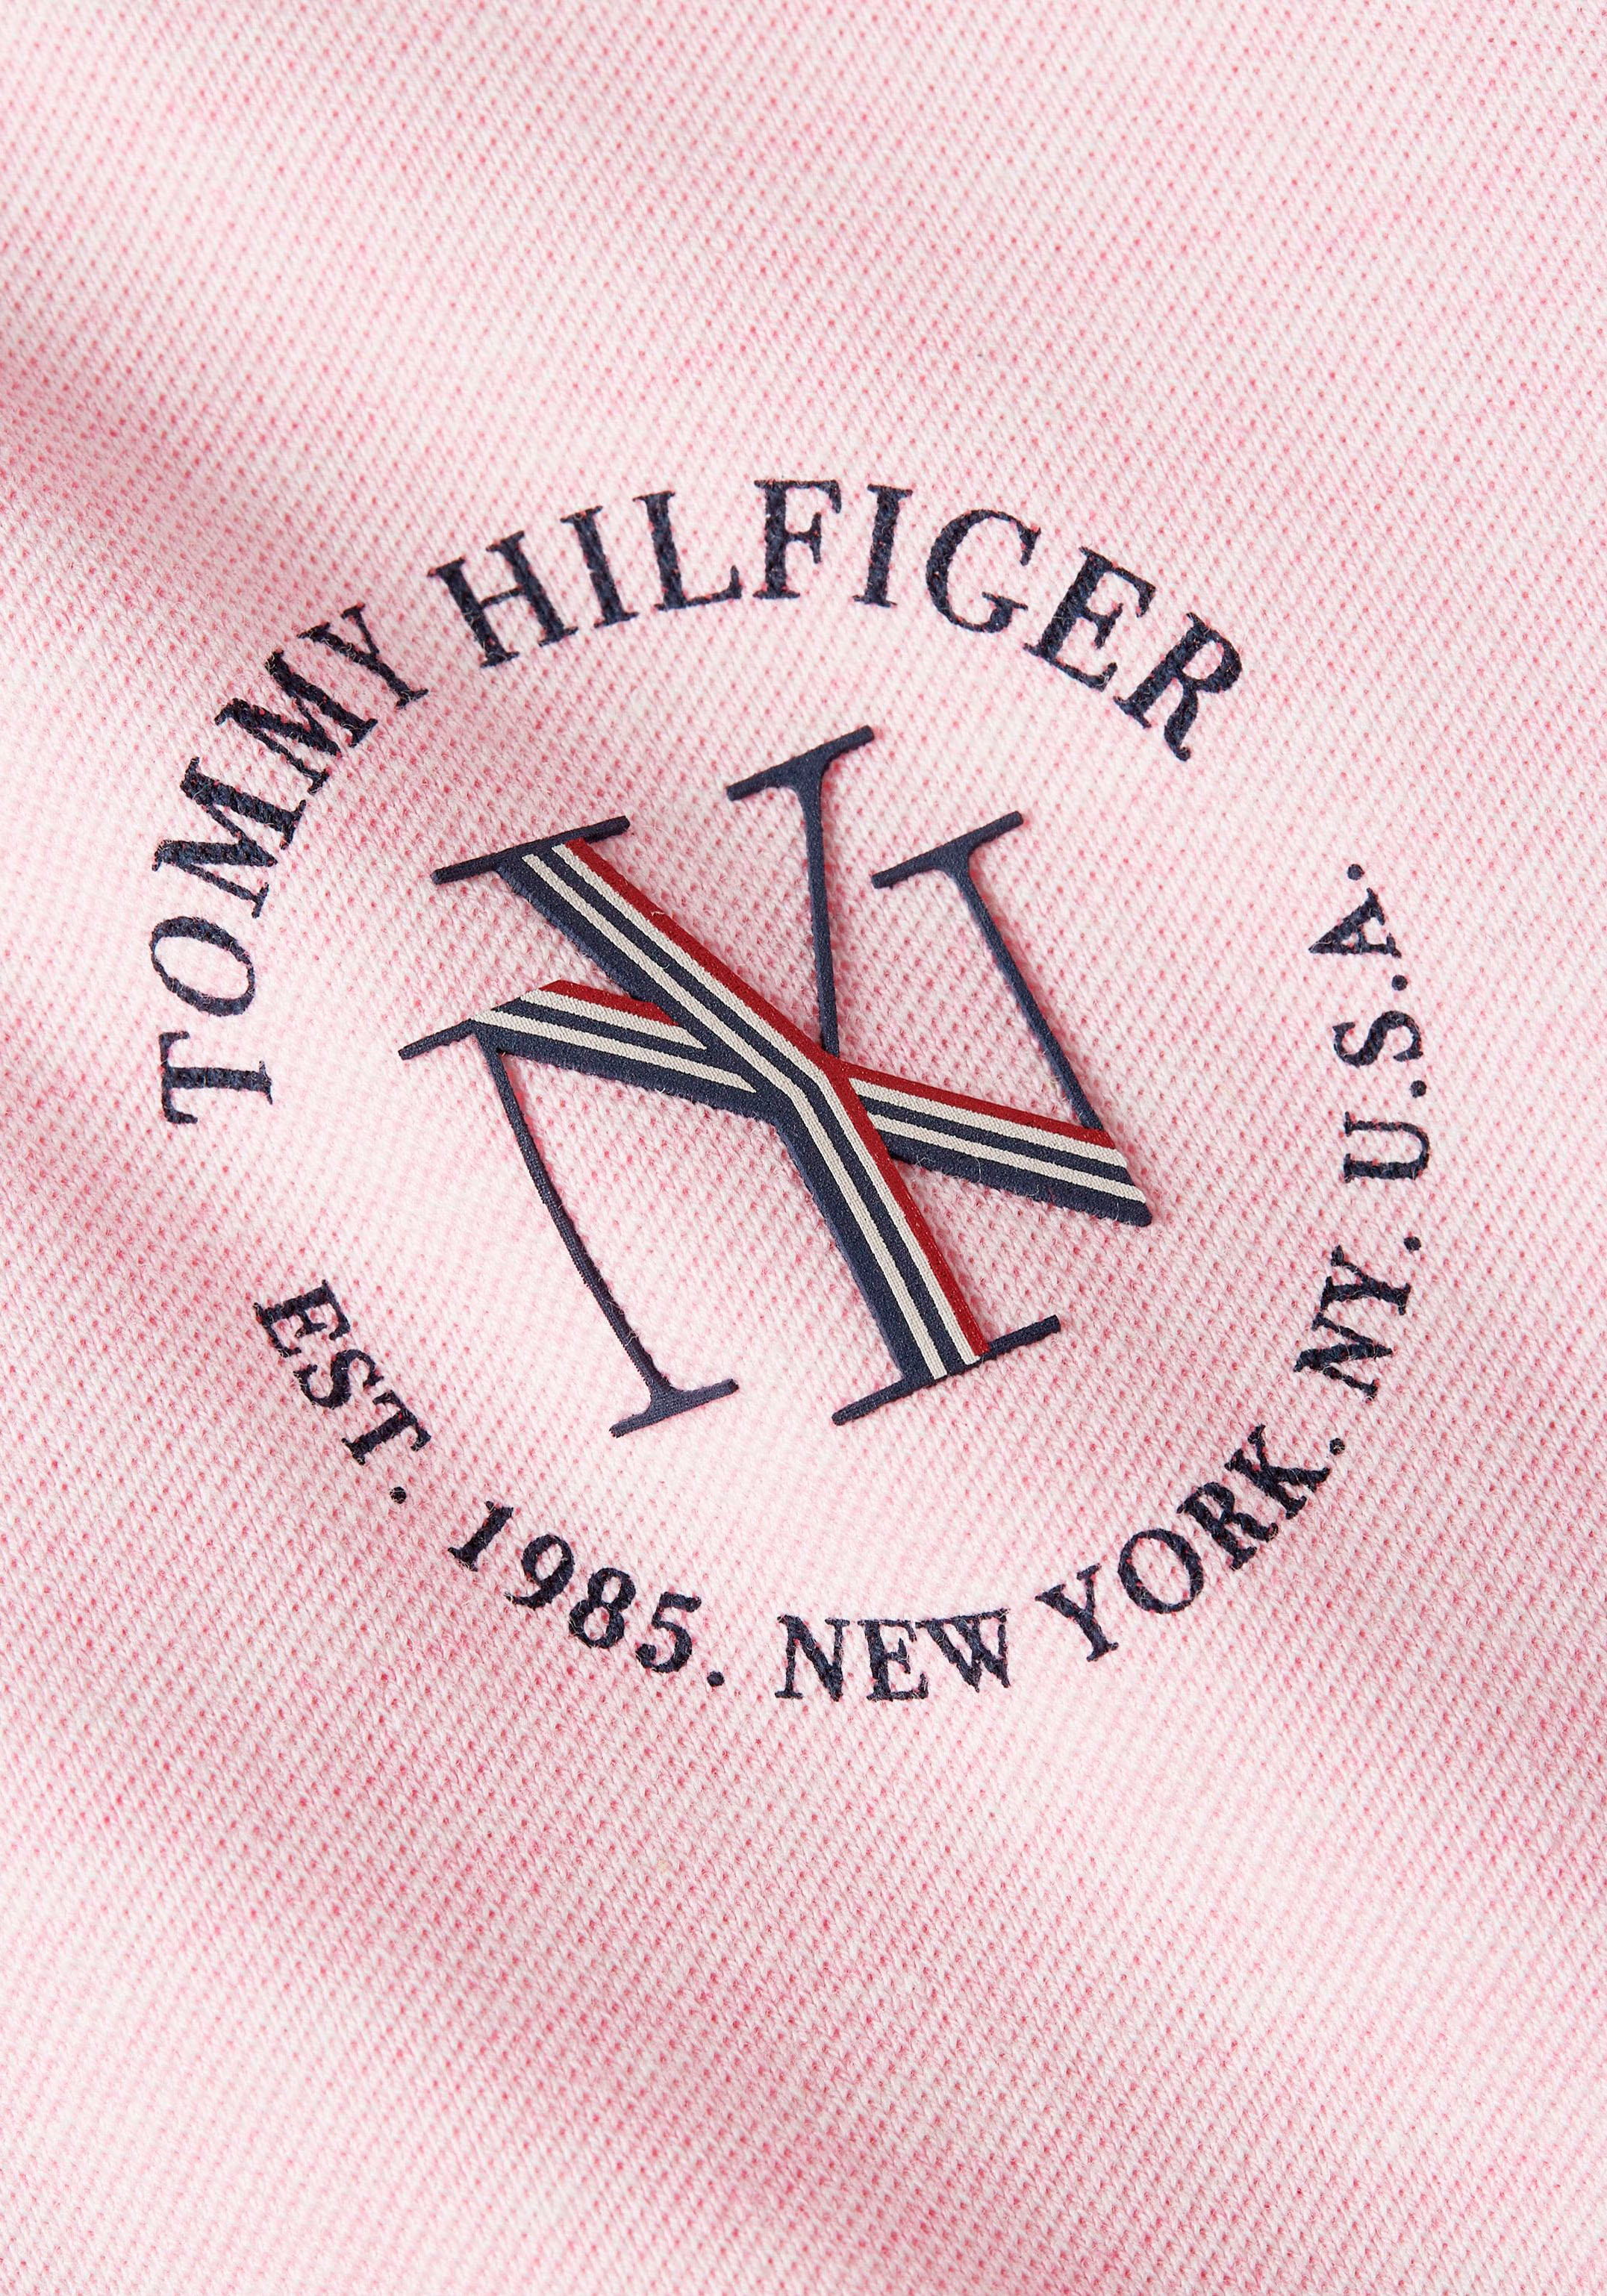 mit Markenlabel NYC SS«, Poloshirt bei POLO »REG Tommy Hilfiger ROUNDALL OTTO Tommy Hilfiger